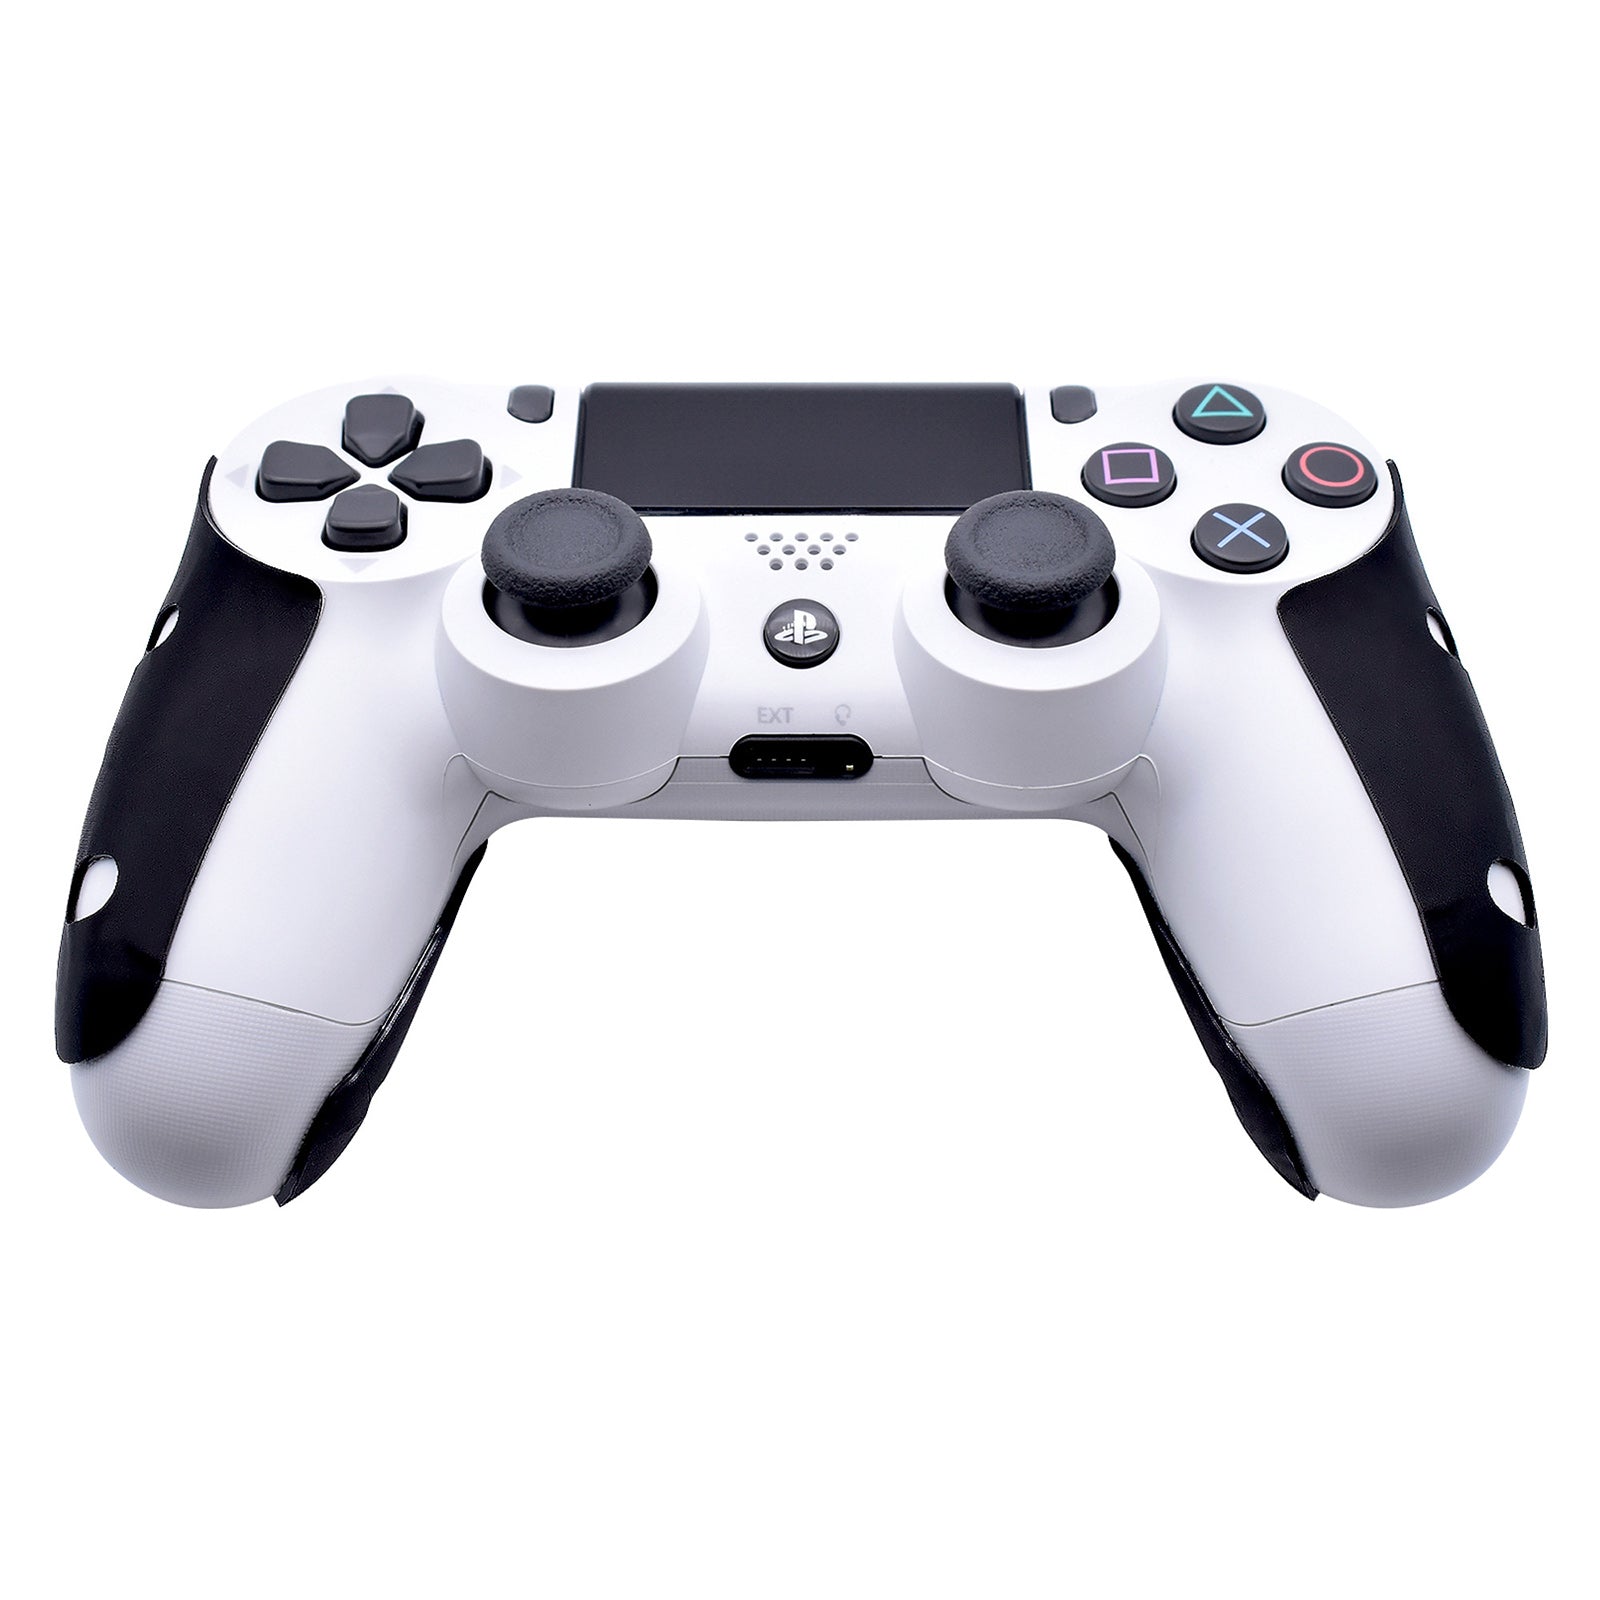 The SMARTGRIP - Revolutionary cover for PS4 controllers, 26,95 €